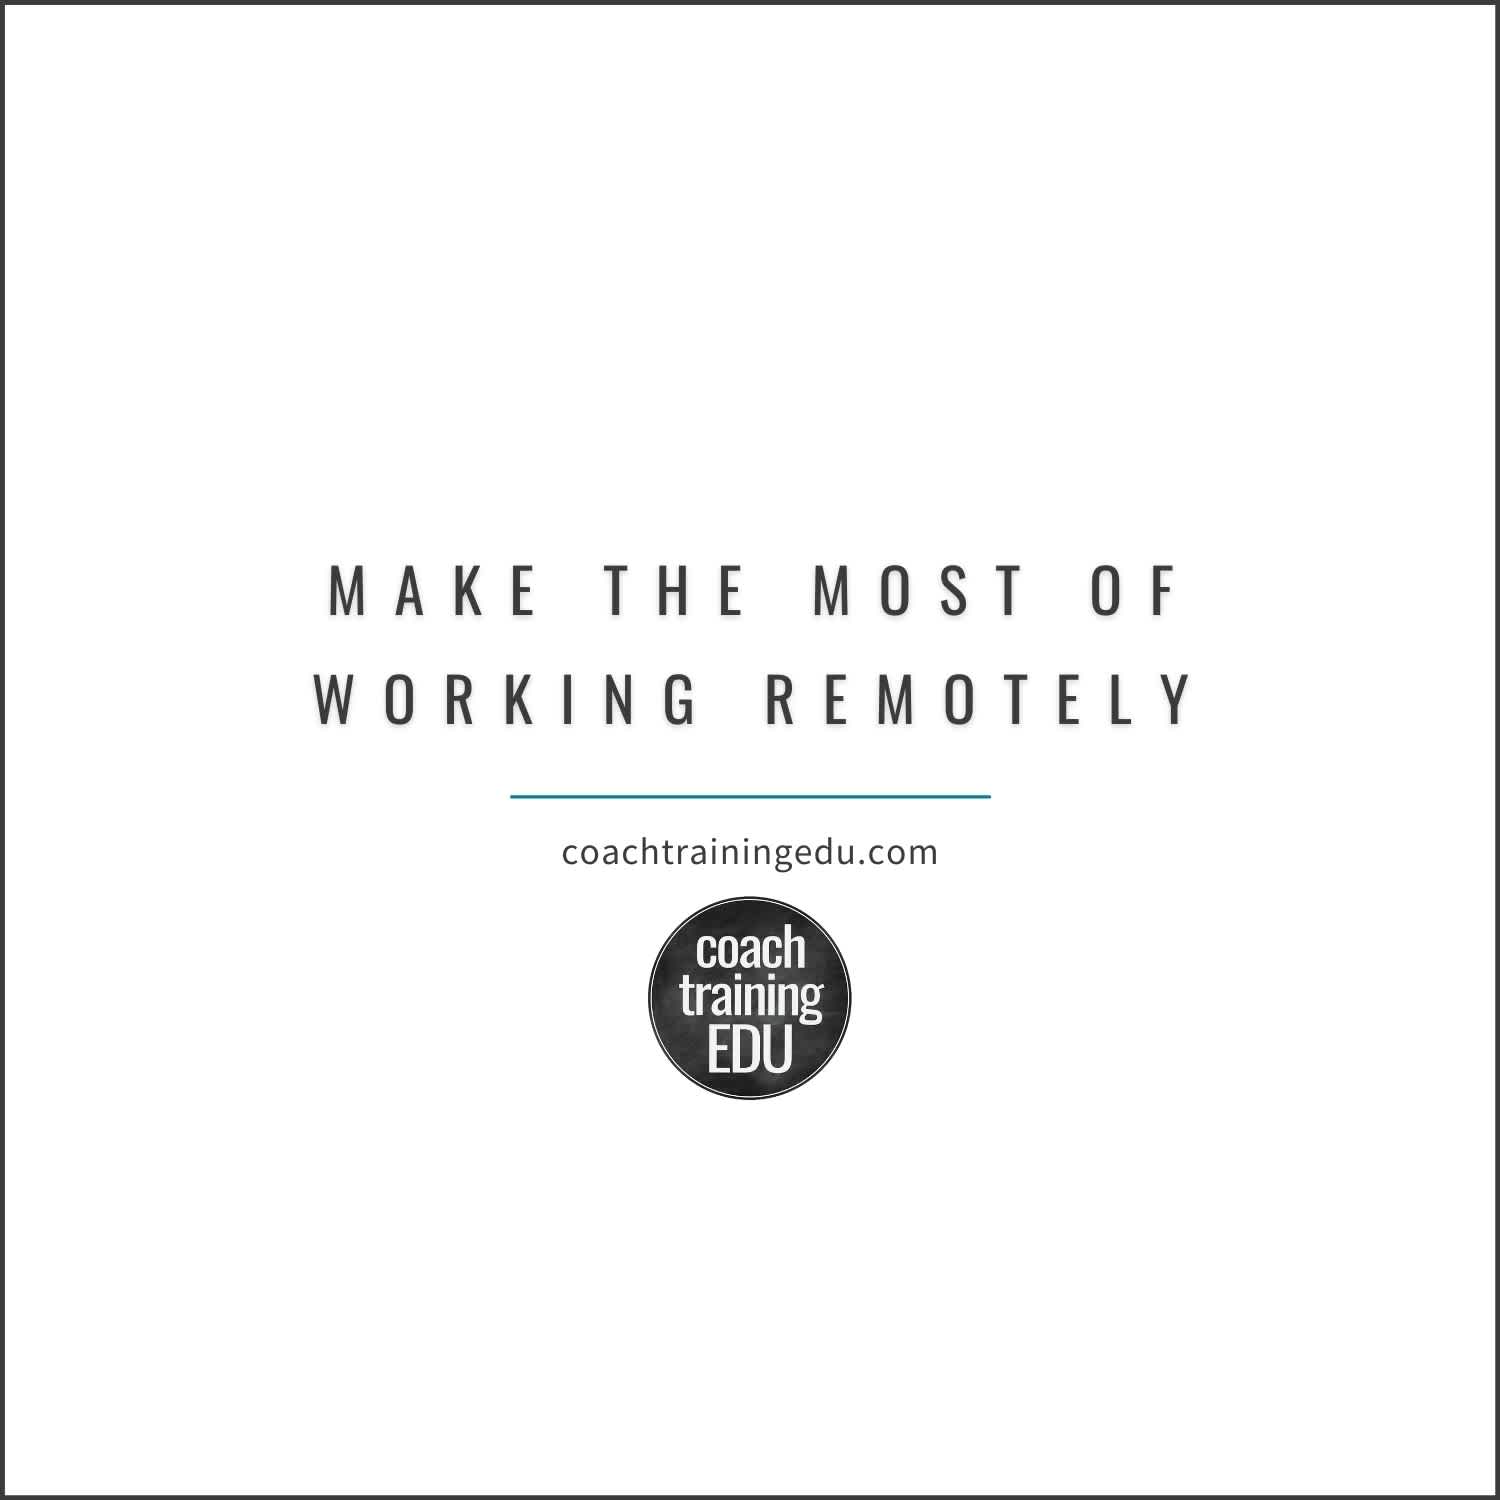 Make the Most of Working Remotely